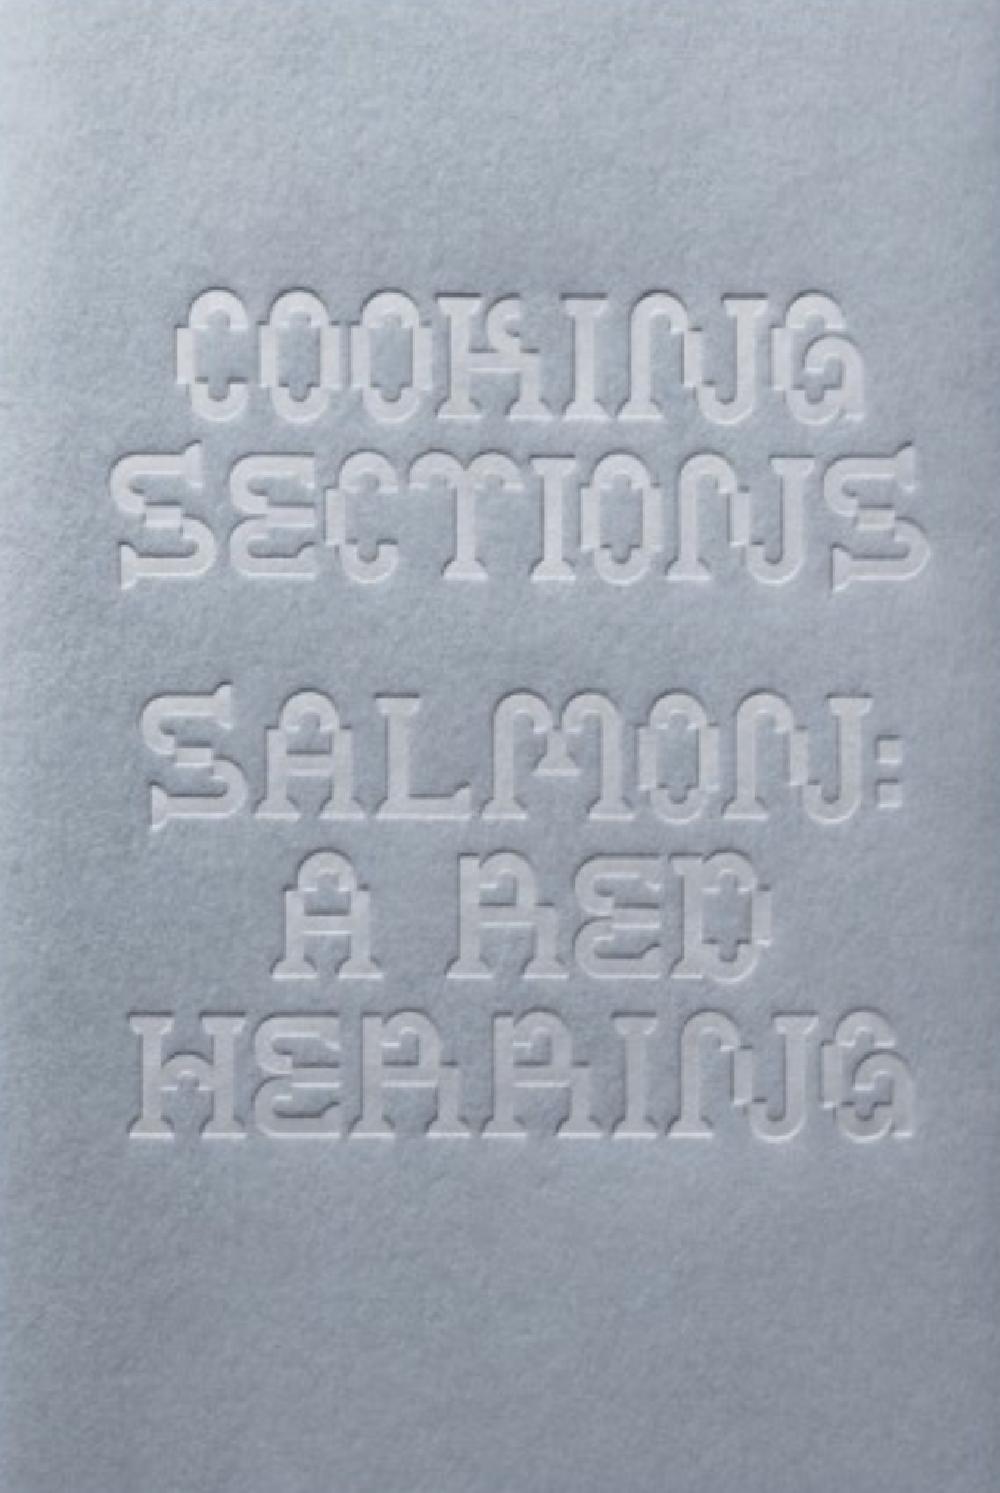 SALMON: A red herring